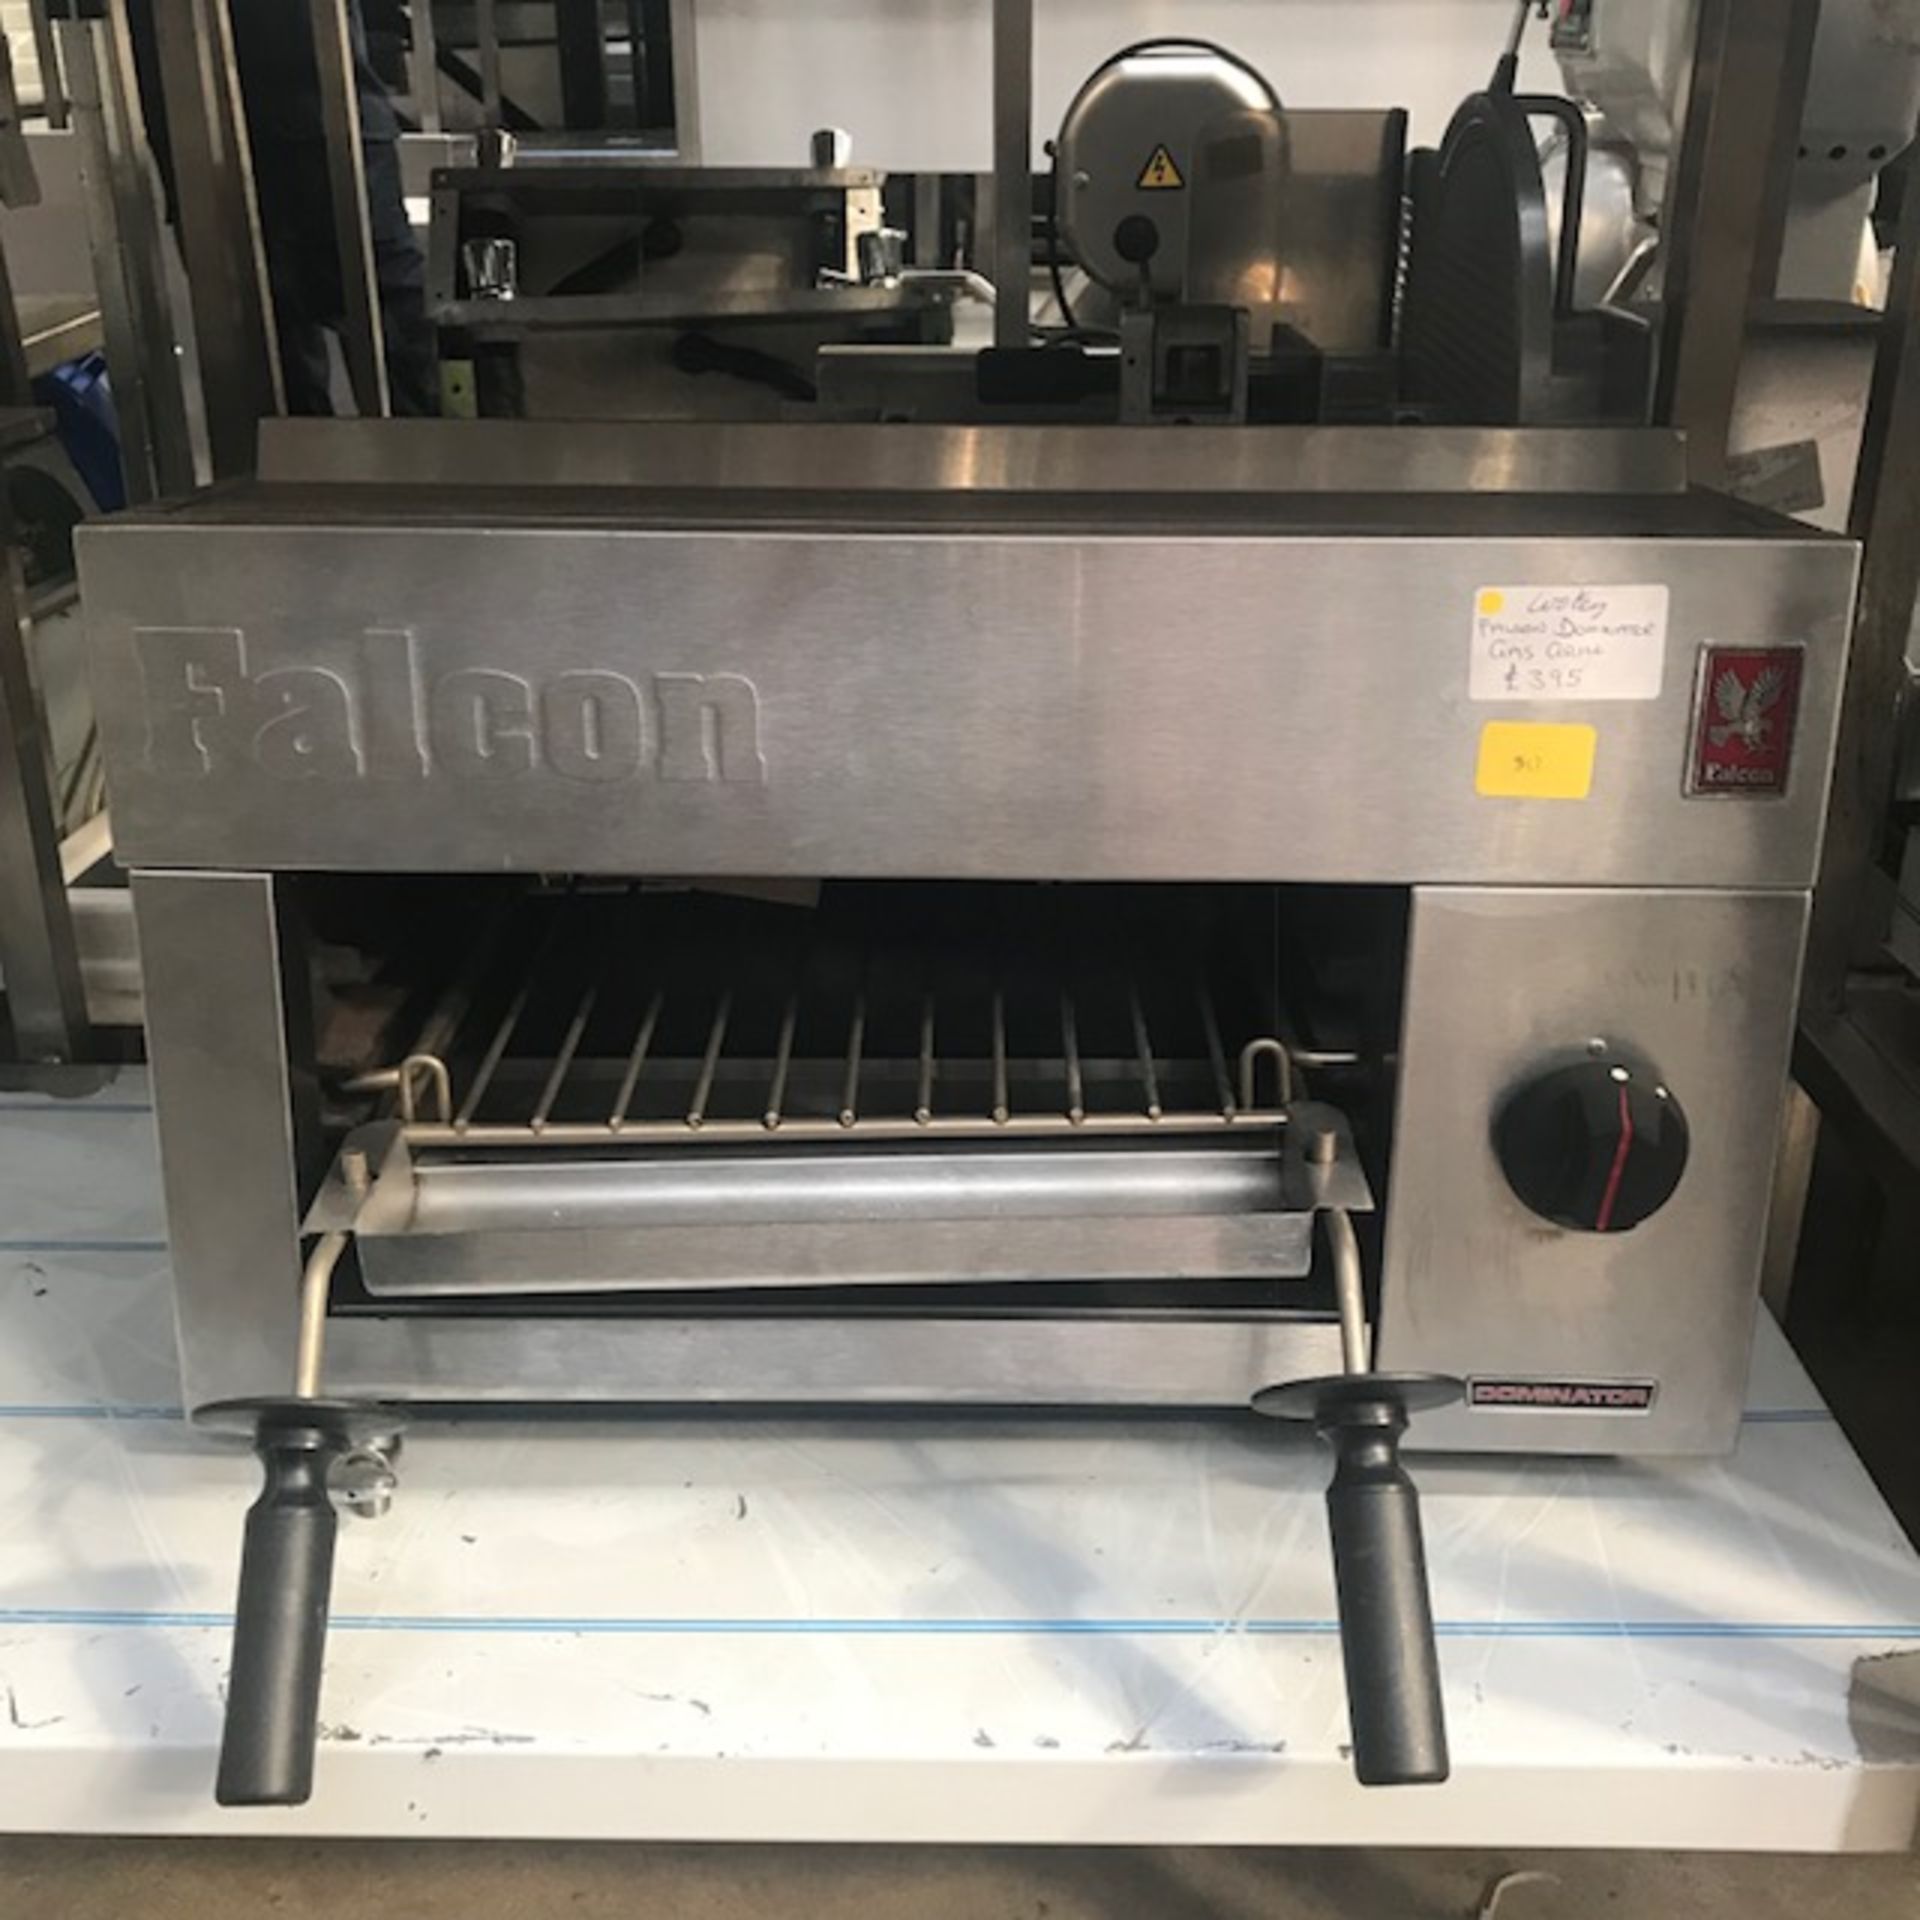 Falcon G2502 Gas grill You are looking at a heavy duty, high output Falcon Gas Grill G2502. This